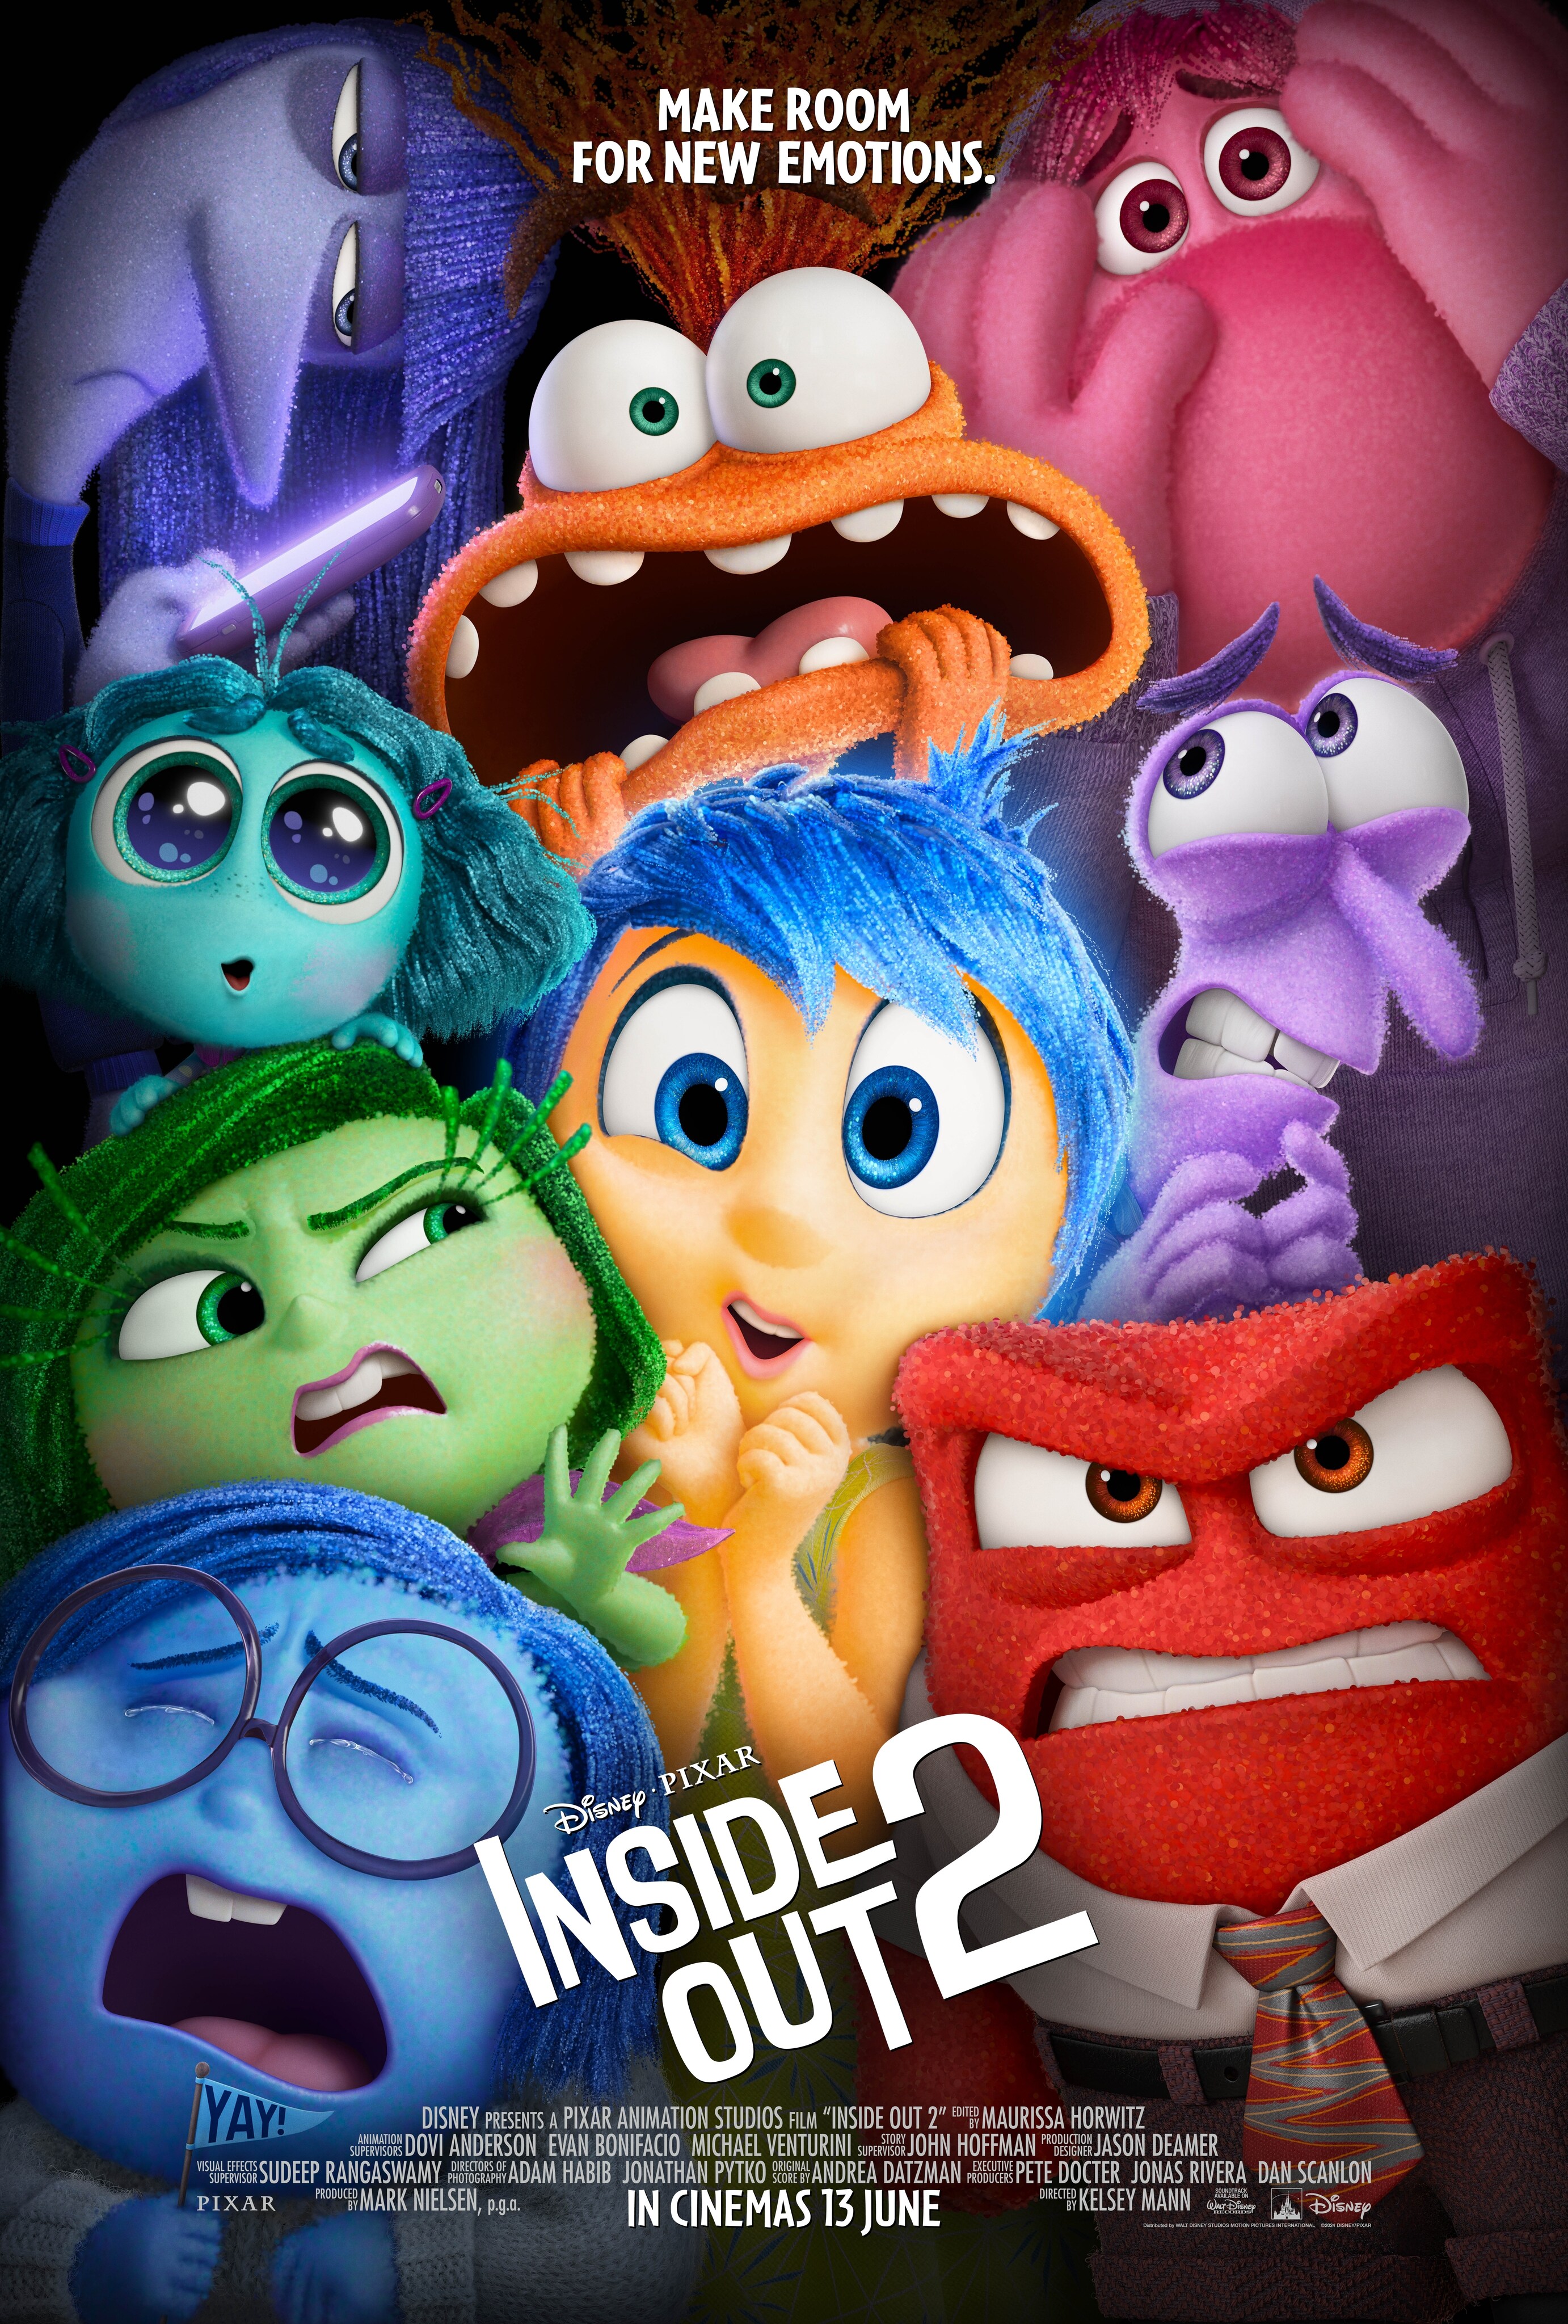 Make room for new emotions. | Disney•Pixar | Inside Out 2 | Only in theaters June 13 | movie poster